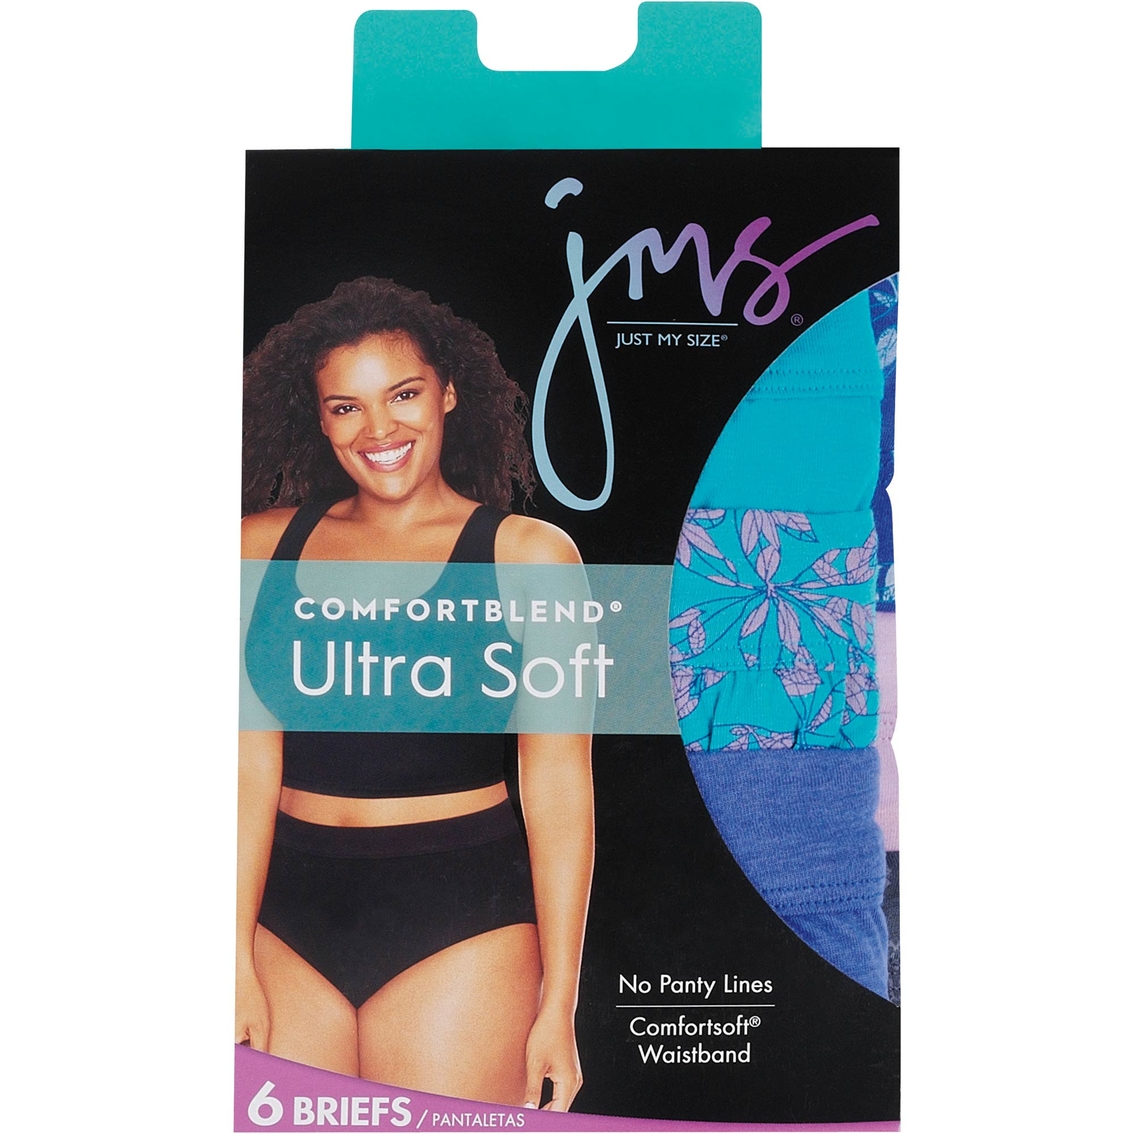 Just My Size Cool Comfort Ultra Soft Briefs 6 Pk.